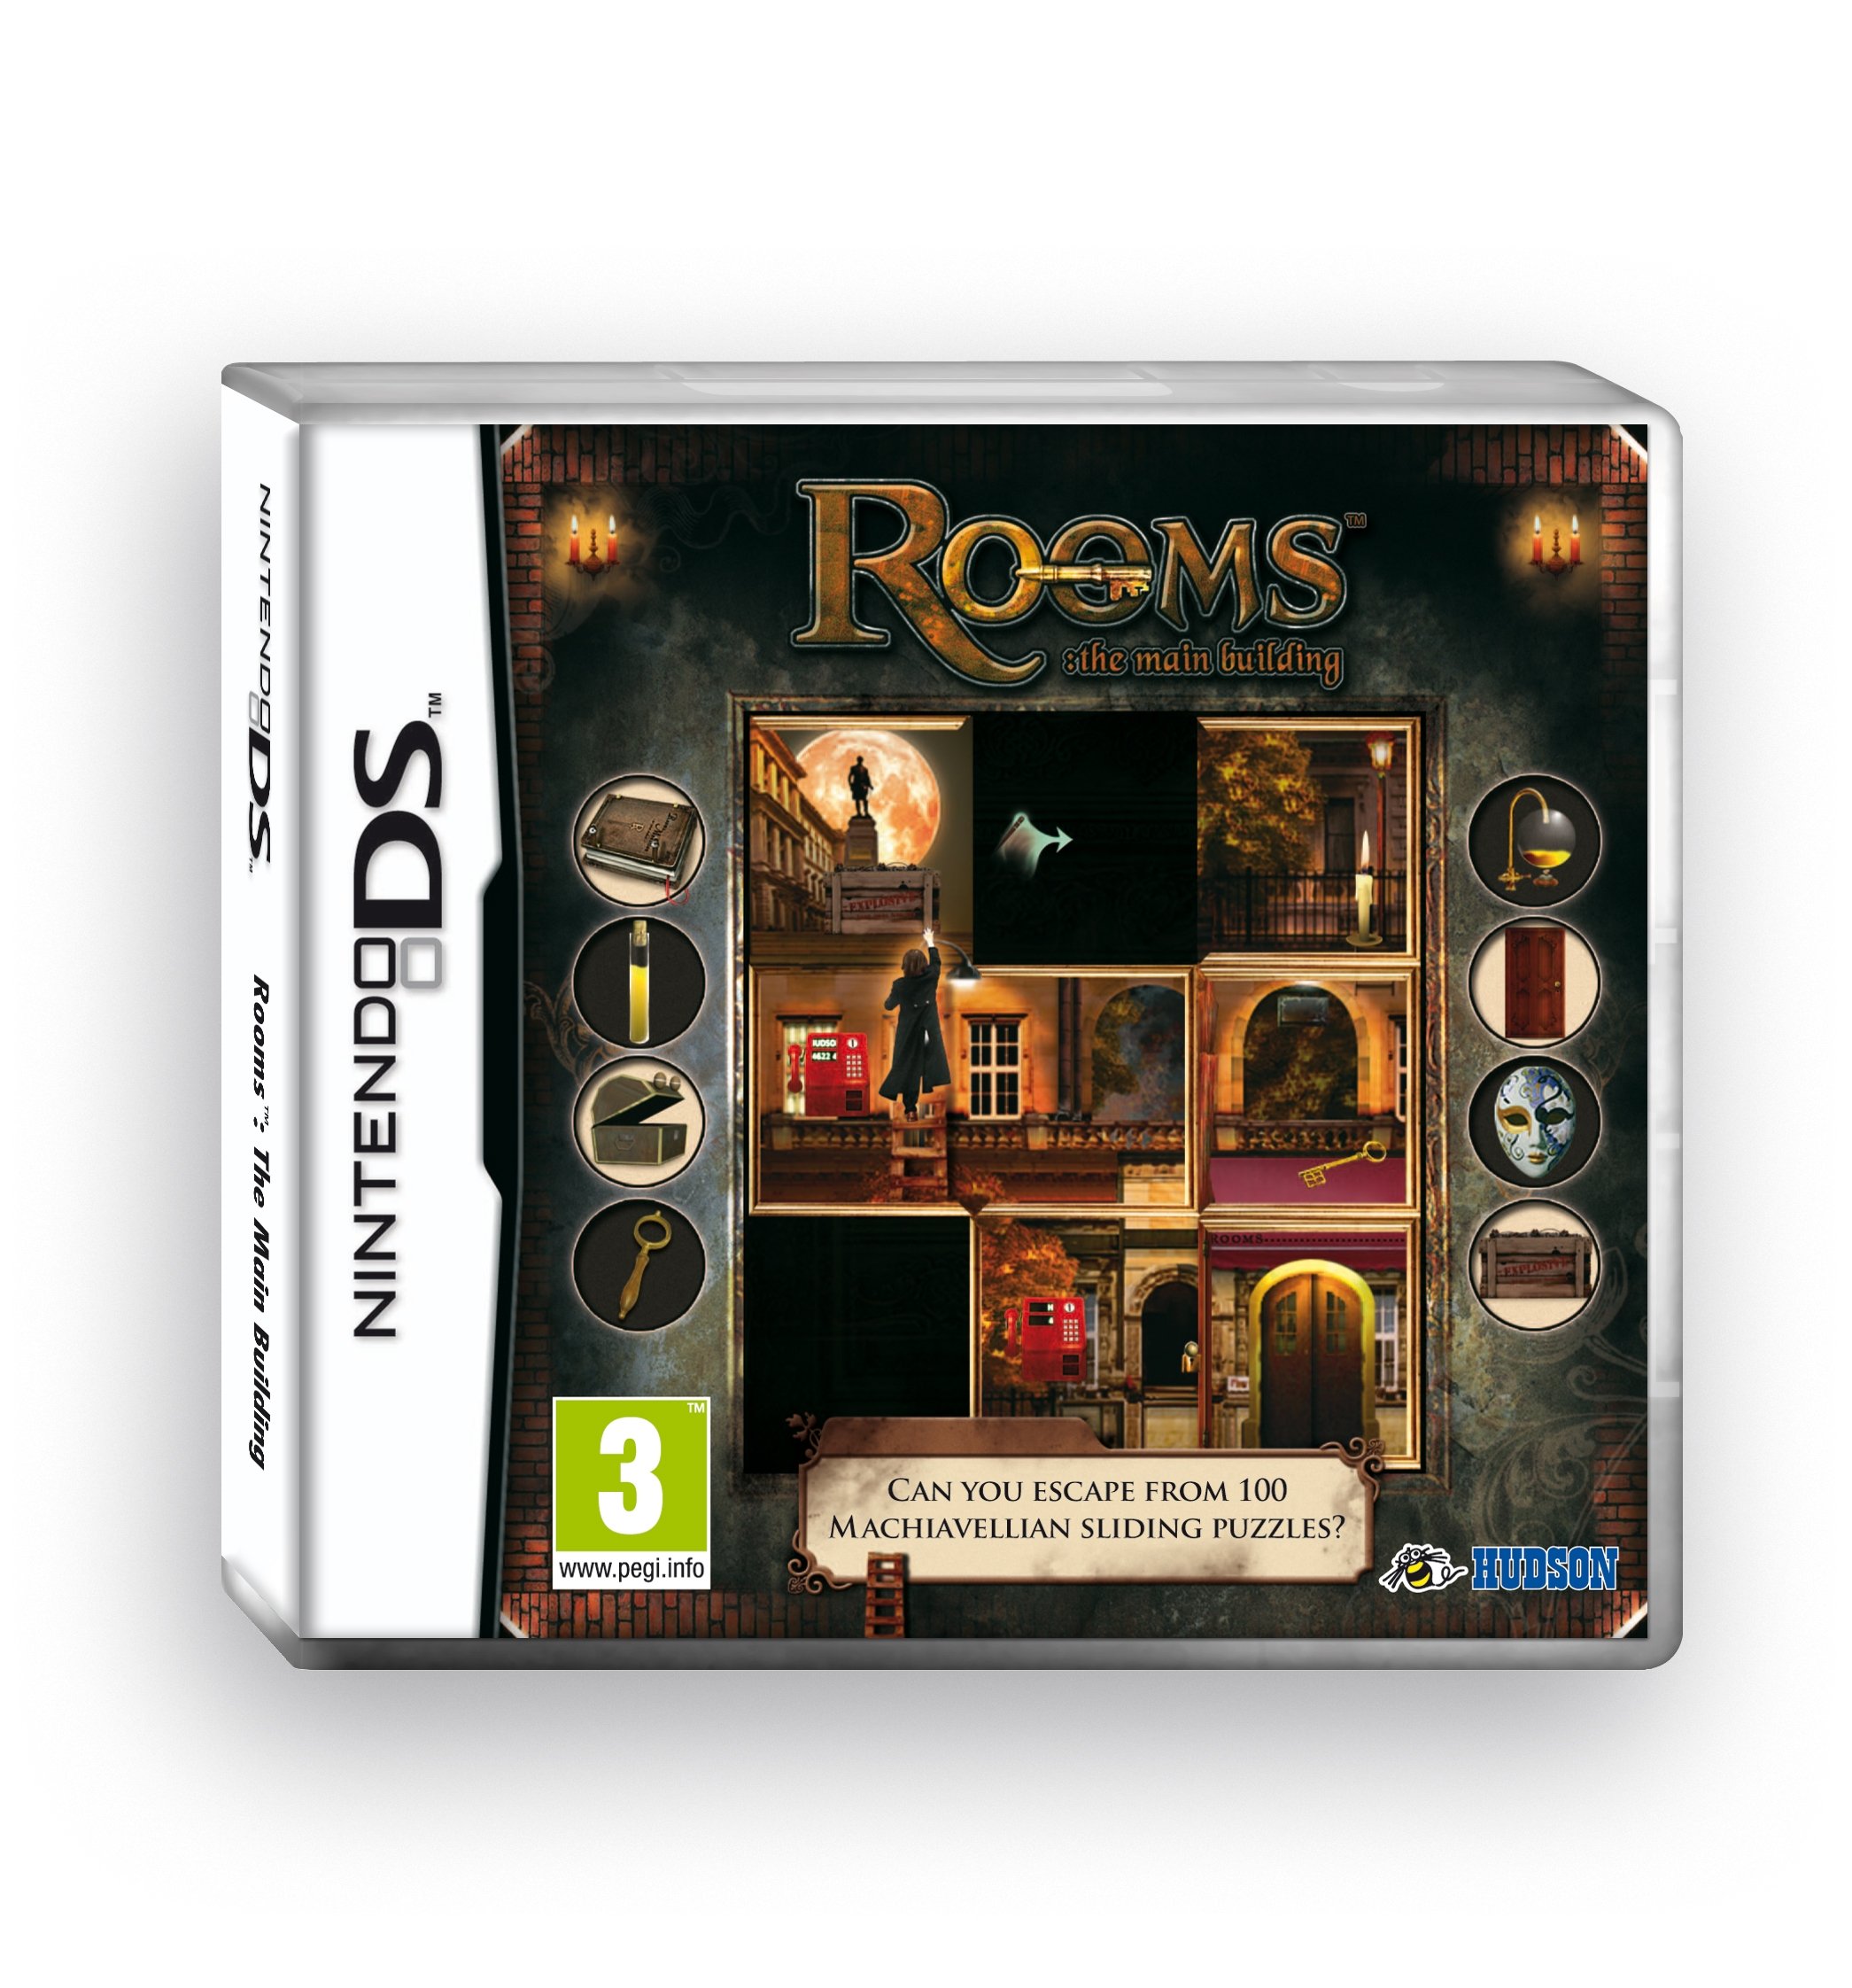 Rooms: The Main Building /nds